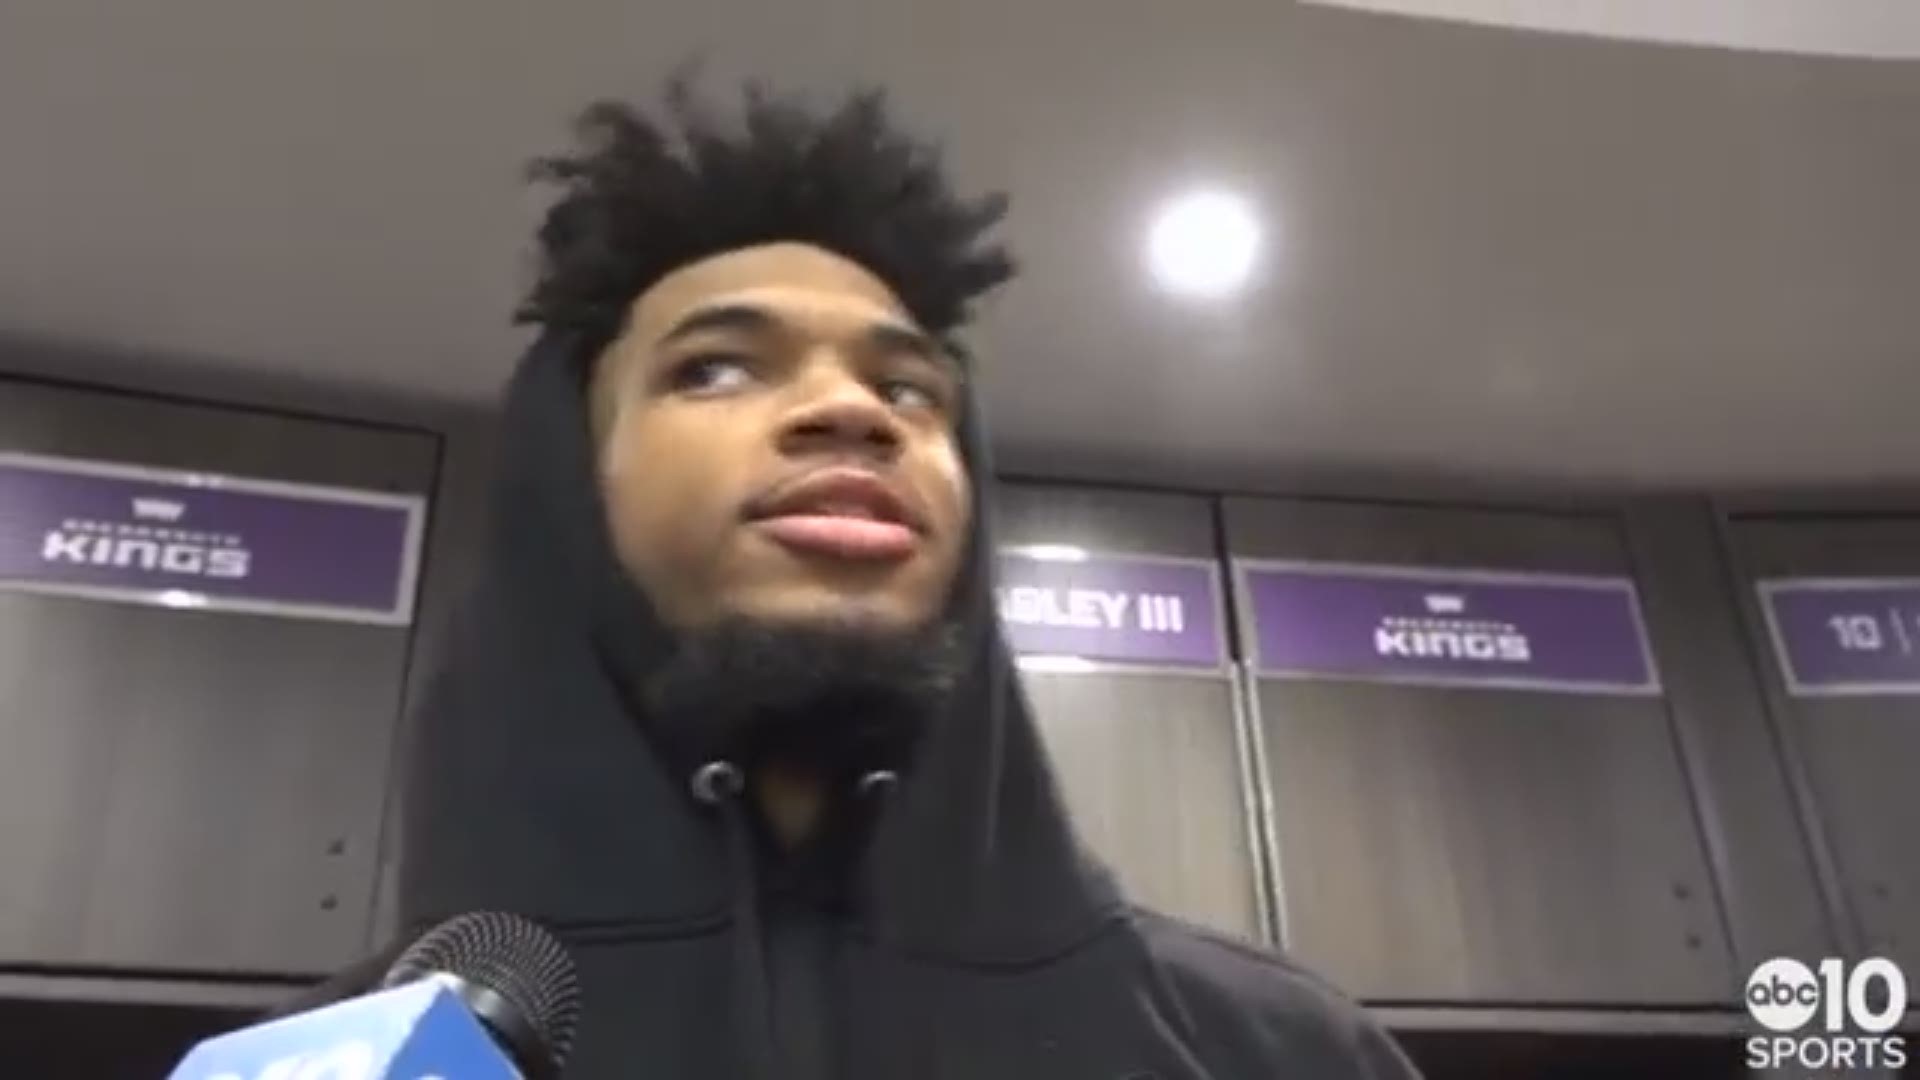 Rookie Marvin Bagley III talks about his career-high 32-point performance against his former high school teammate DeAndre Ayton and his Phoenix Suns in the Kings 117-104 victory in Sacramento on Sunday afternoon.